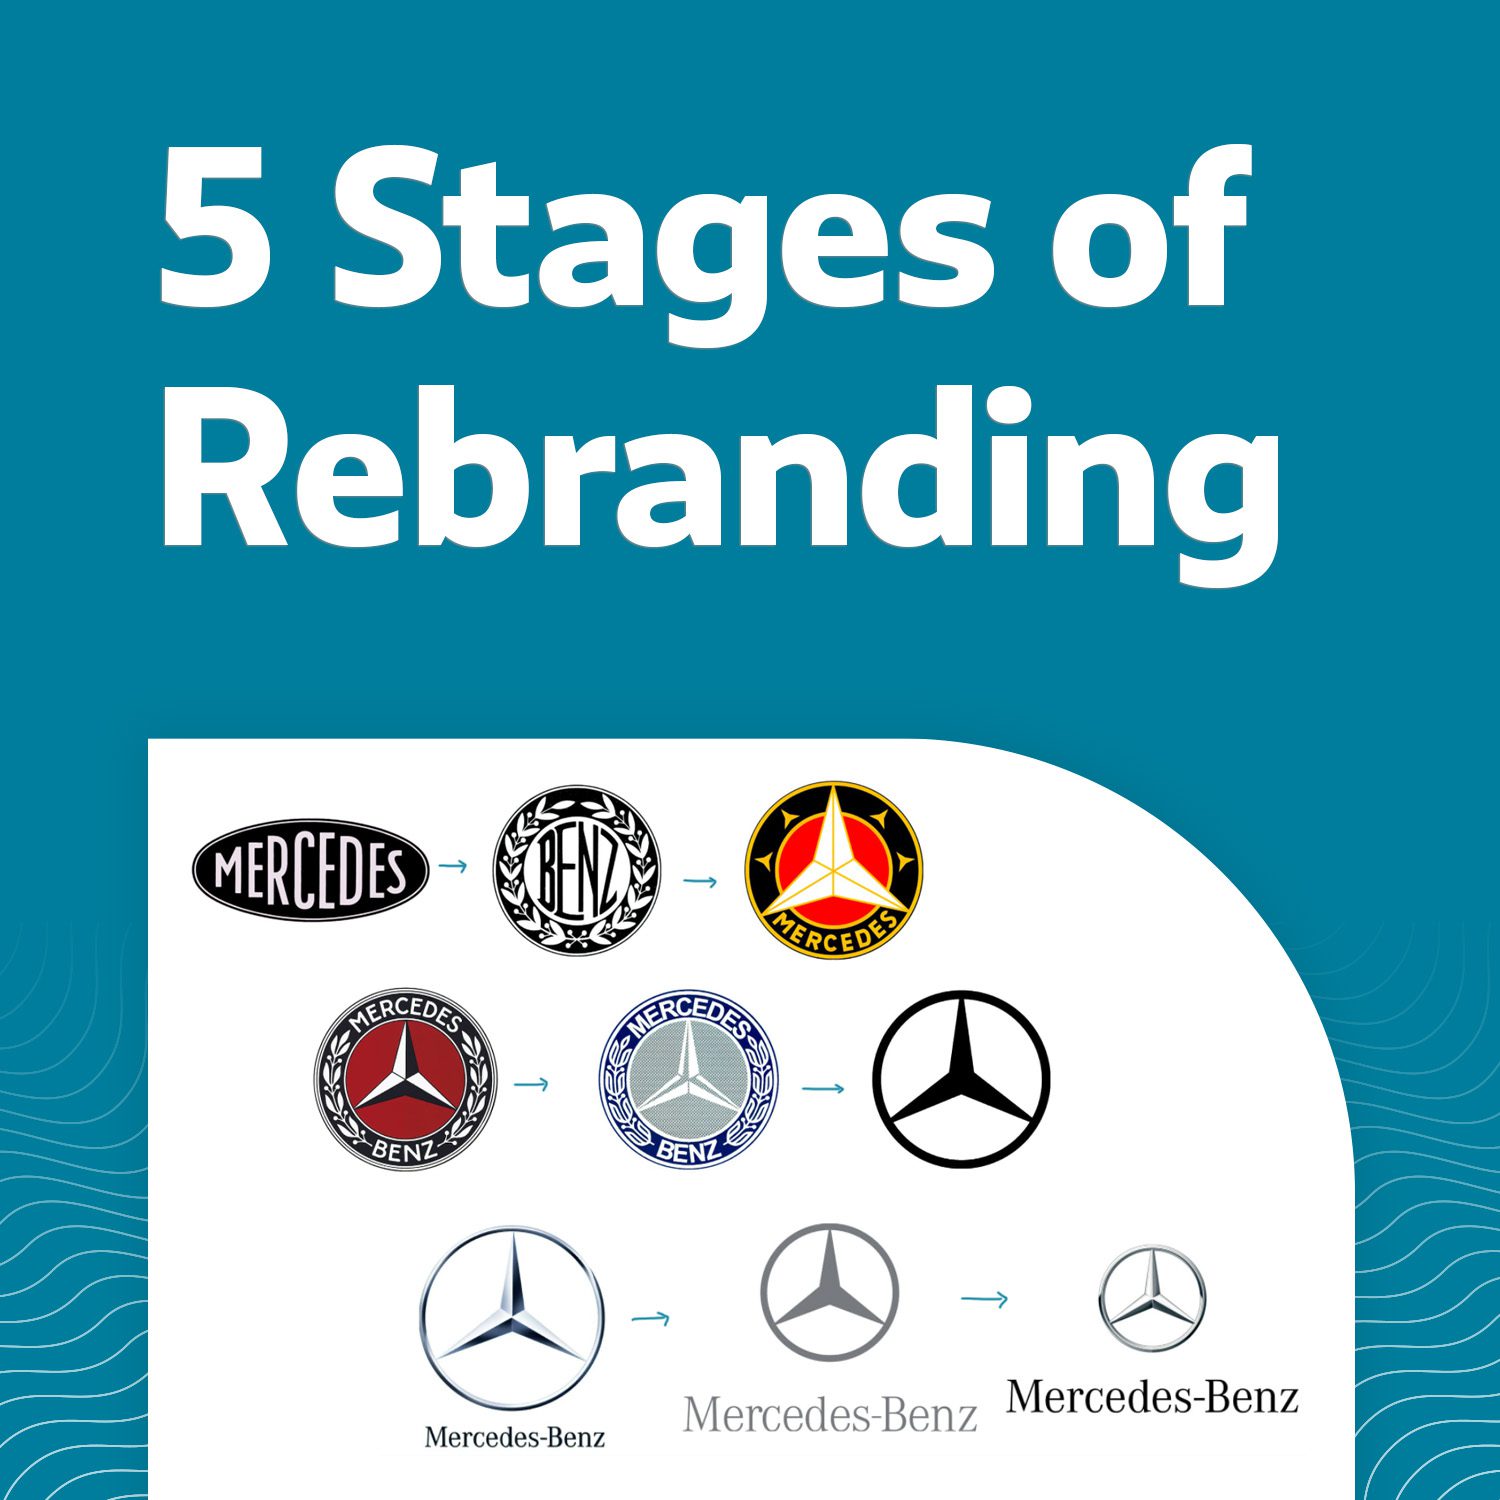 Stages of Rebranding